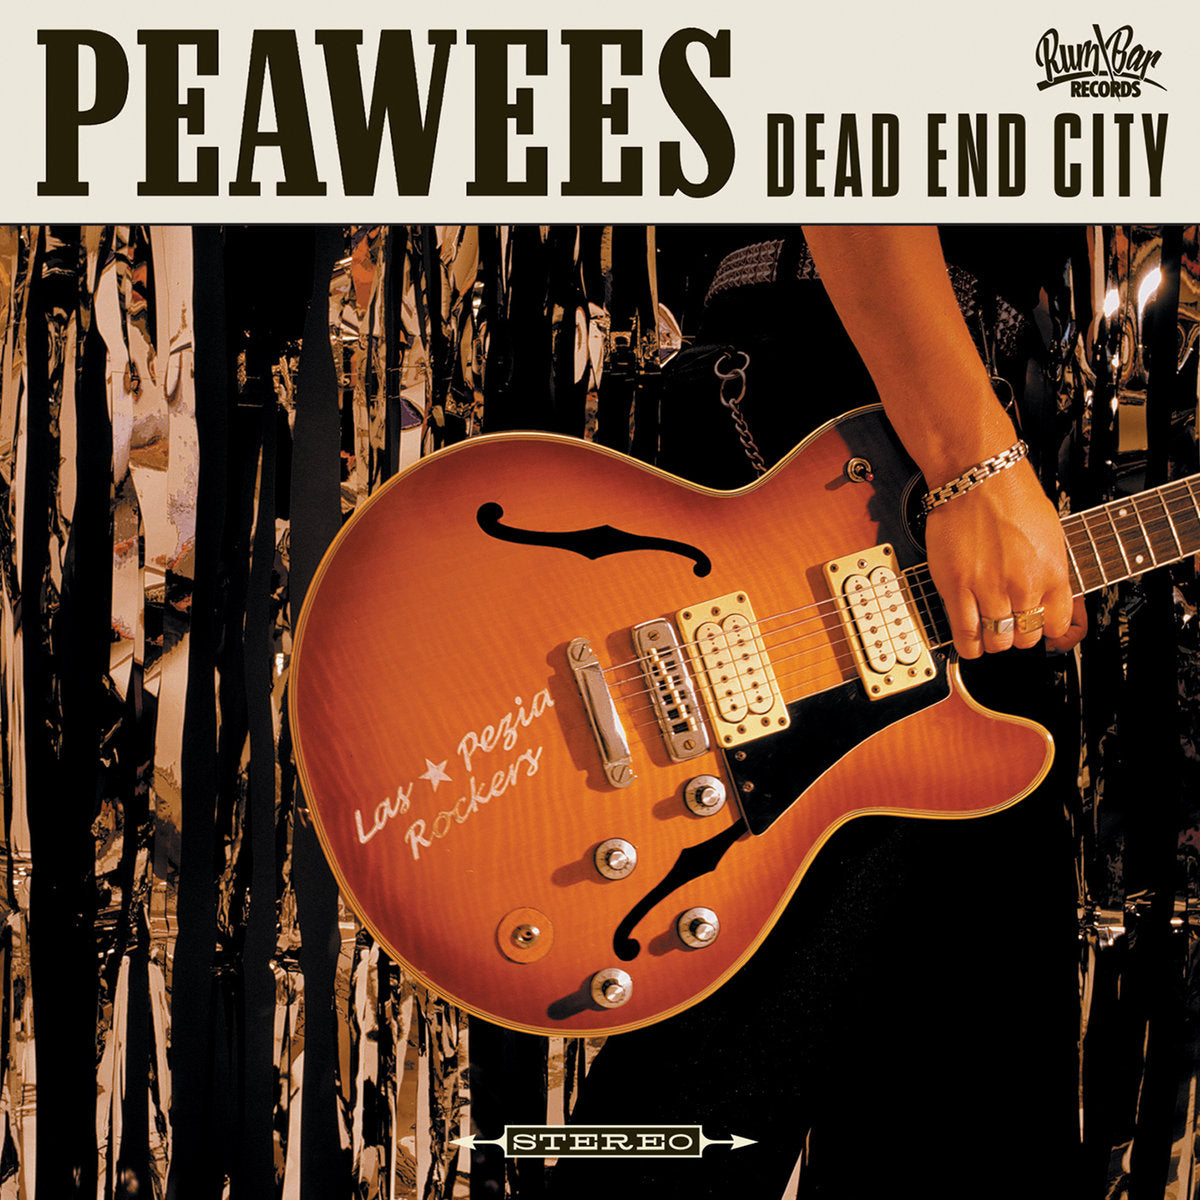 Peawees- Dead End City CD ~DELUXE REISSUE WITH 3 BONUS TRACKS!